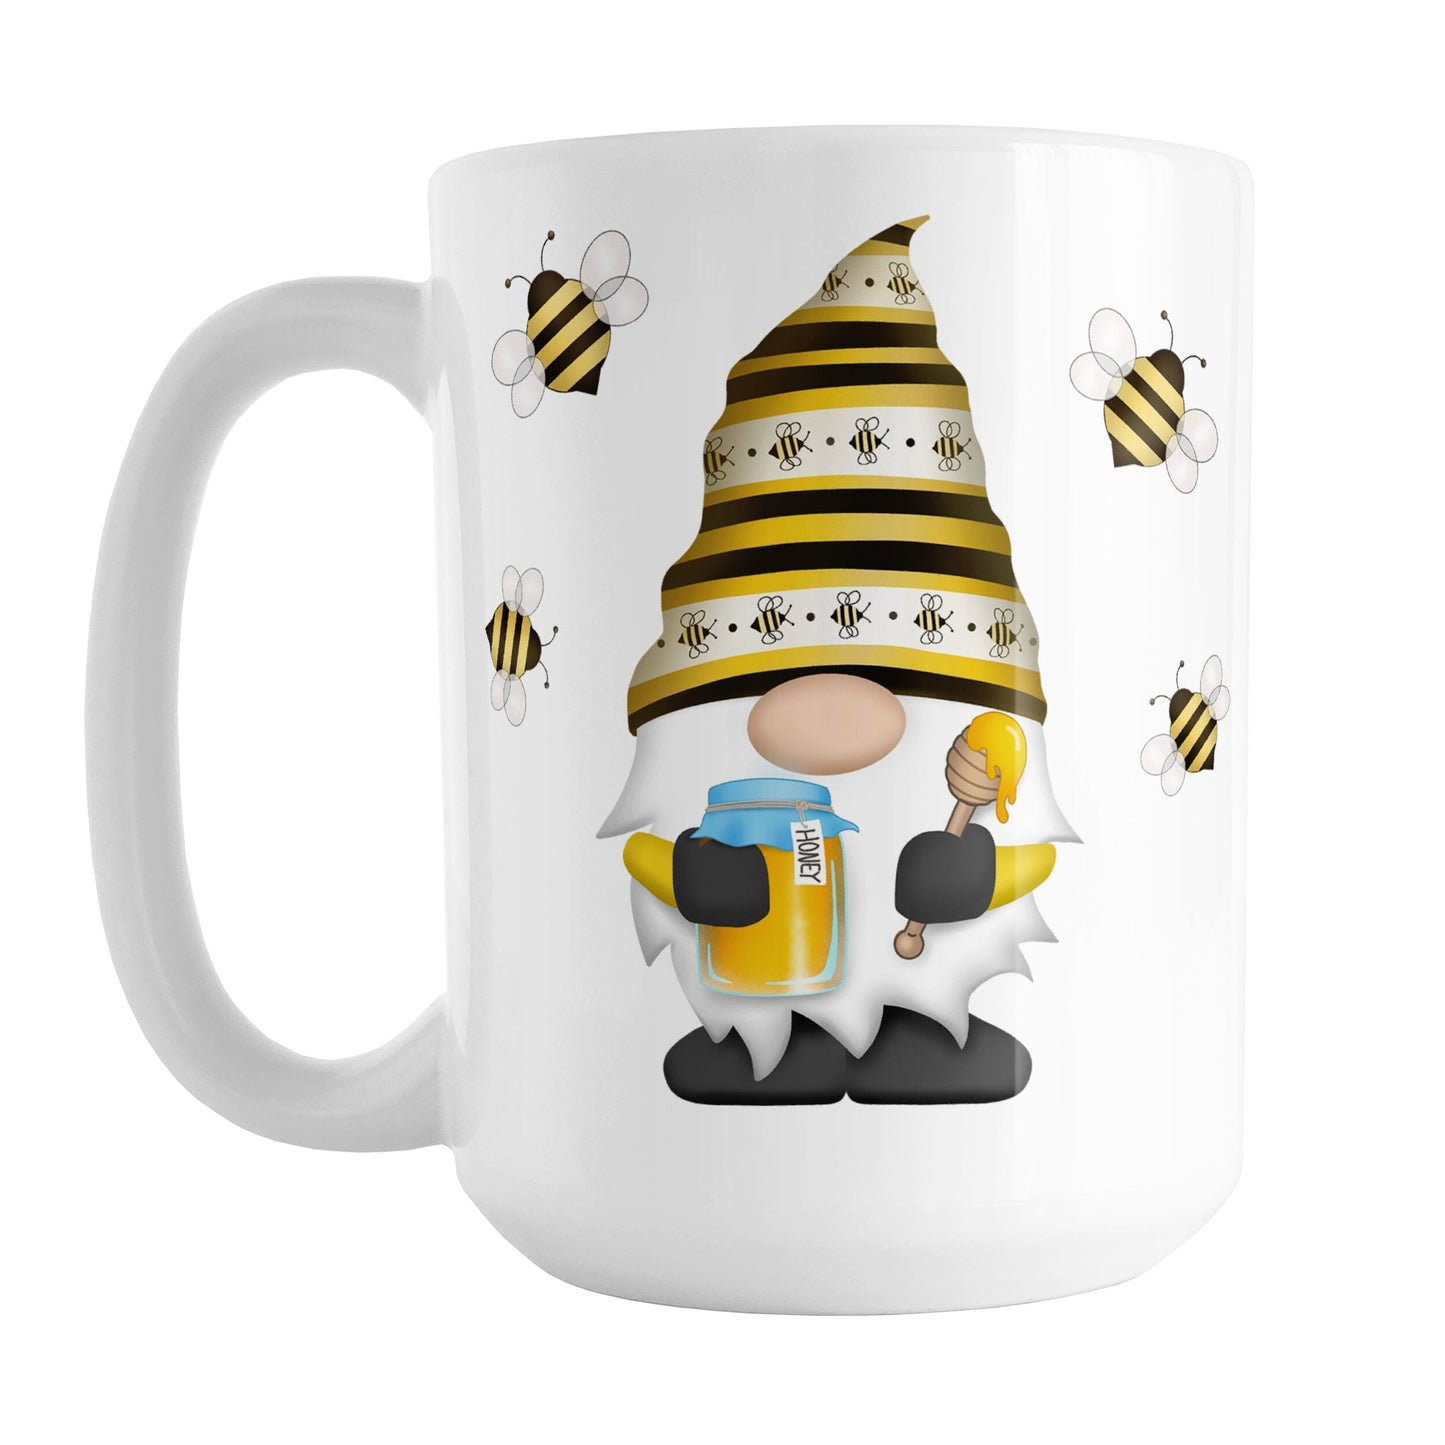 Honey Bee Gnome Mug (15oz) at Amy's Coffee Mugs. A ceramic coffee mug designed with a gnome wearing an adorable hat with black and yellow stripes and bees, holding a jar of honey and a honey dipper, with bees flying around the gnome. This cute honey bee gnome illustration is on both sides of the mug. 